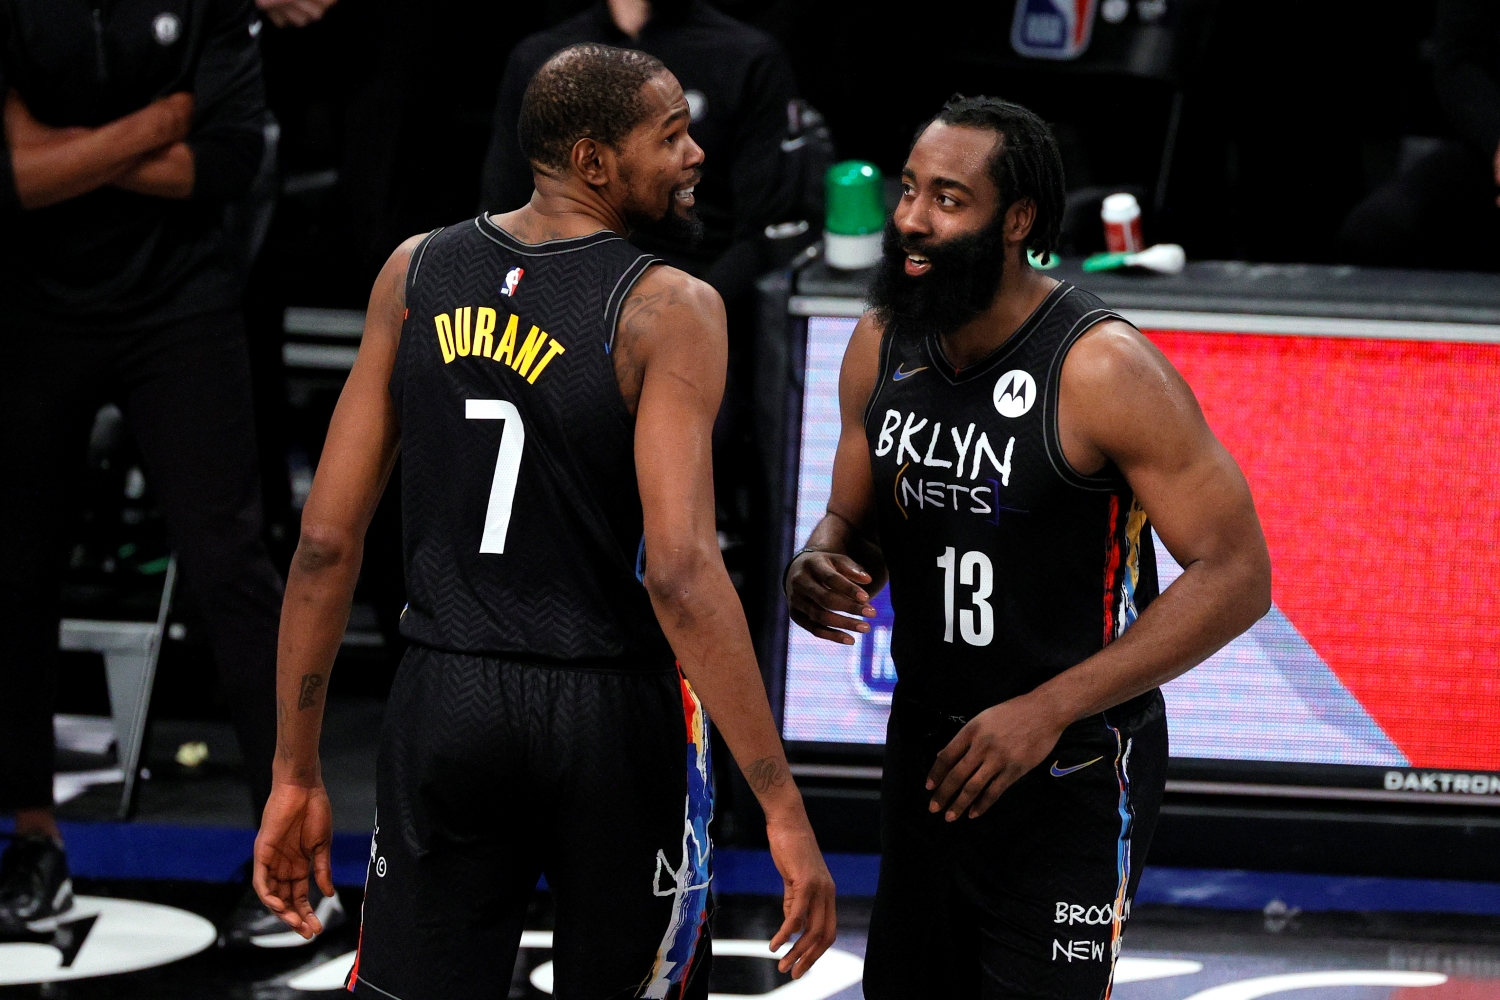 Brooklyn Nets star Kevin Durant and James Harden react after a play during the second half of a game against the LA Clippers.